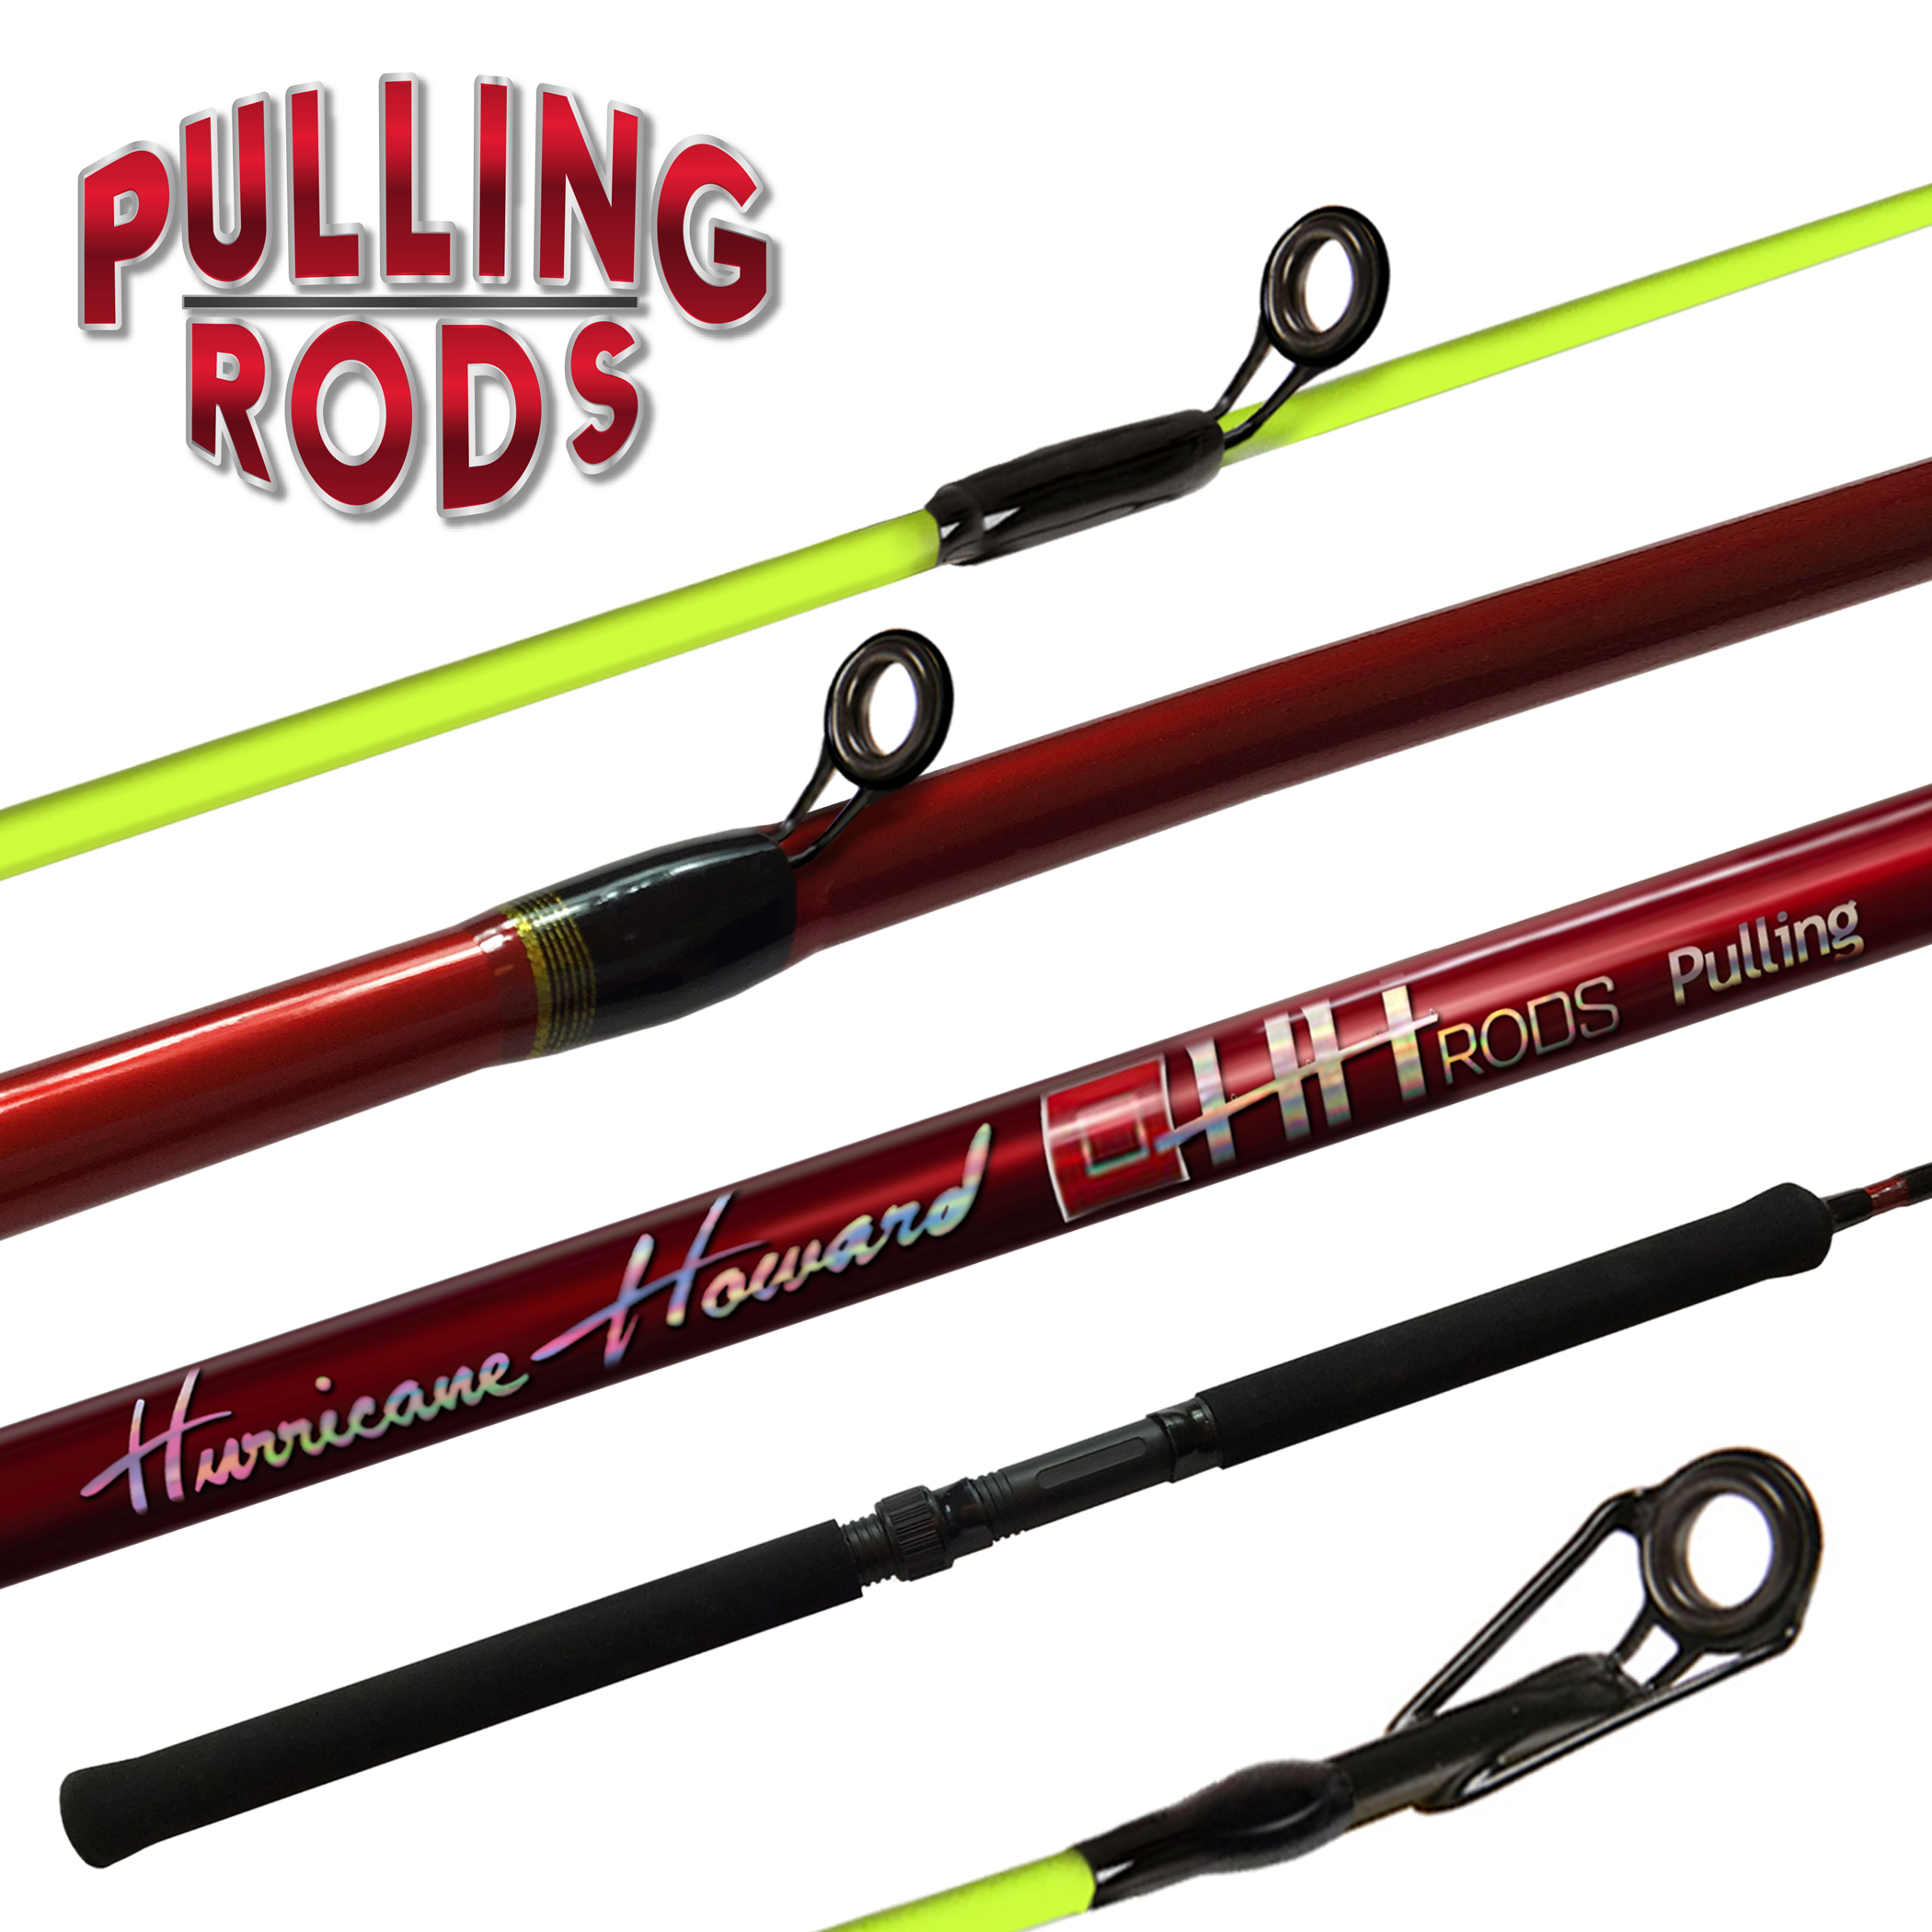 Hurricane Pulling Rod 10 Ft – HH Rods and Reels